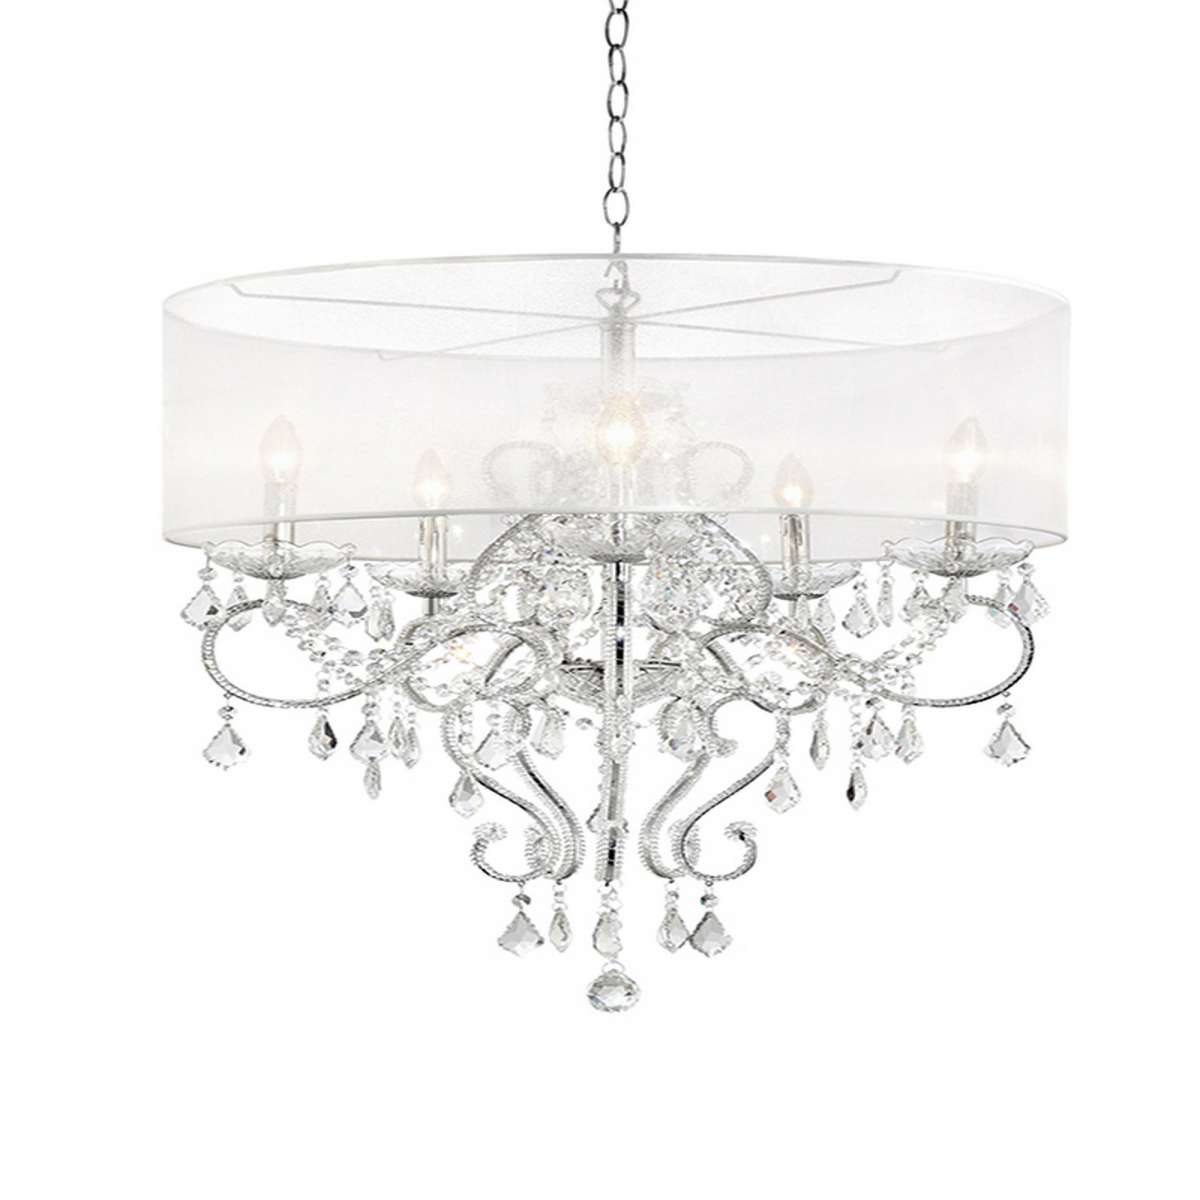 Ceiling Lamp With Hanging Crystals And Round Canopy, Silver By Benzara